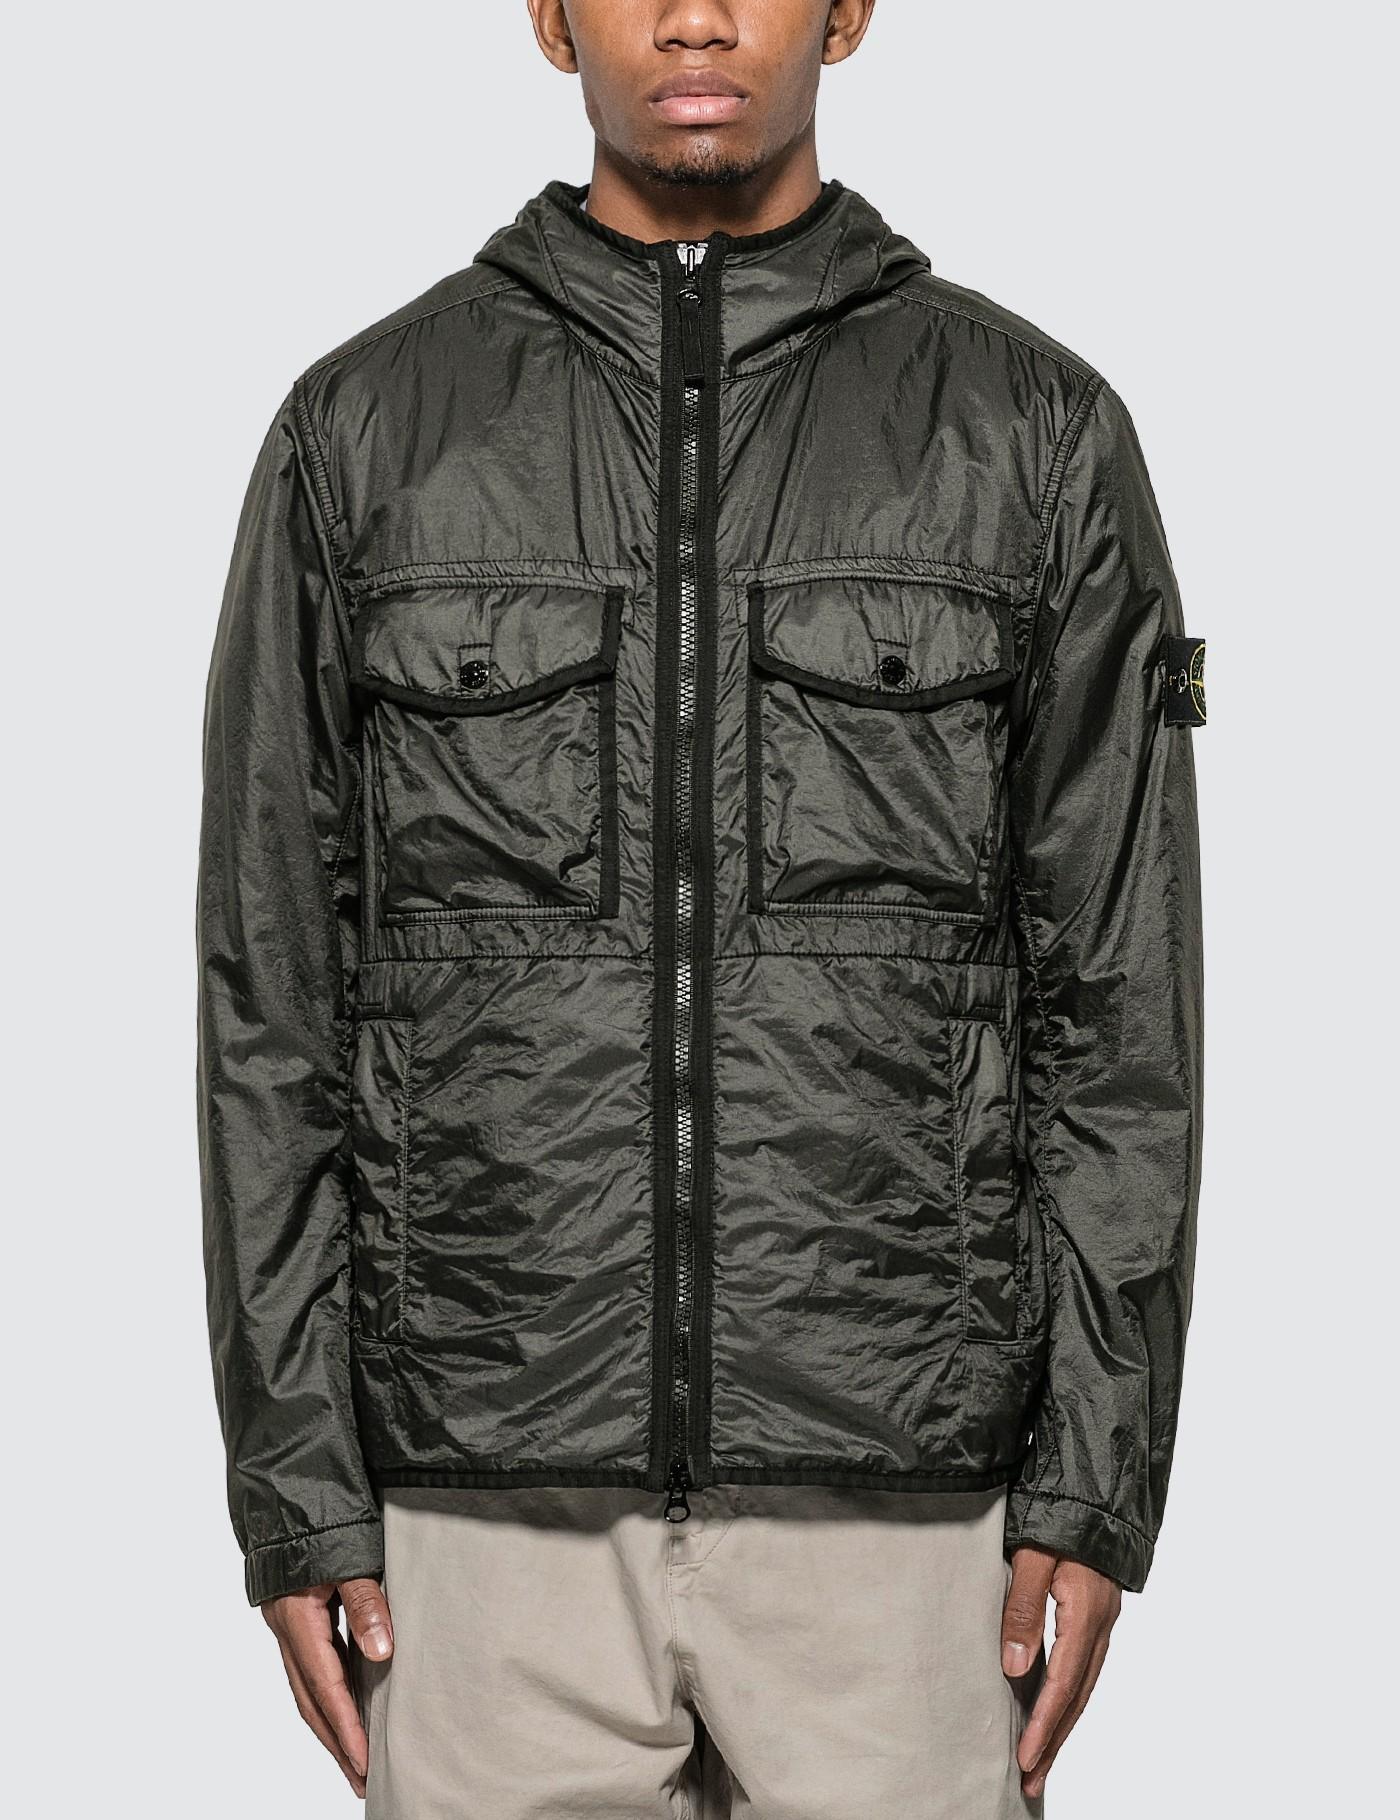 Stone Island Synthetic Light Zip Jacket With Visible Pockets in Black